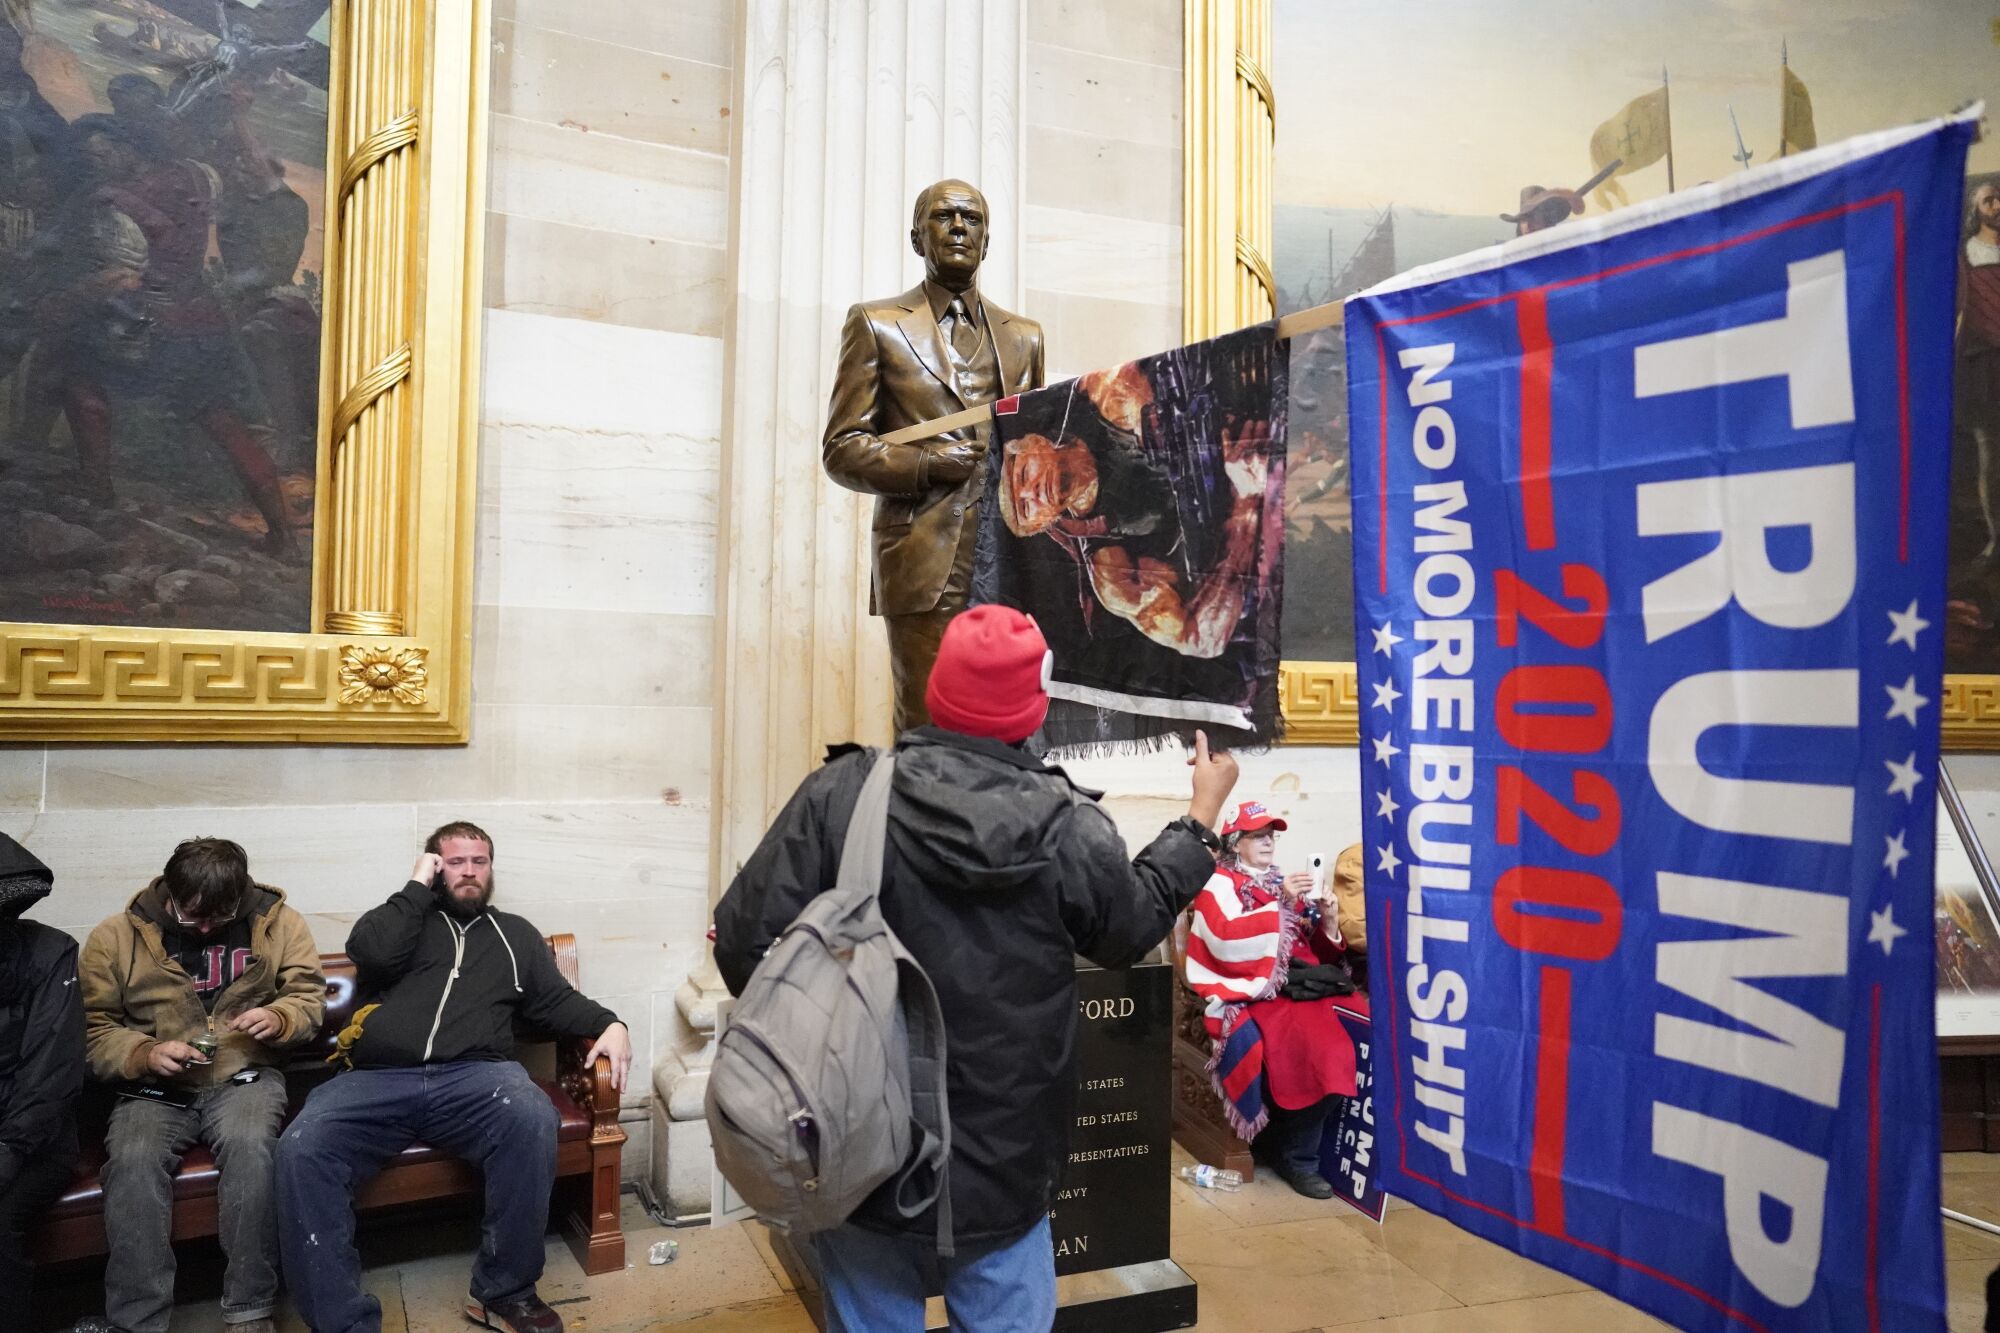 Trump supporters sit on a bench and have stuck a Trump flag reading "No more bullshit" into a statue.